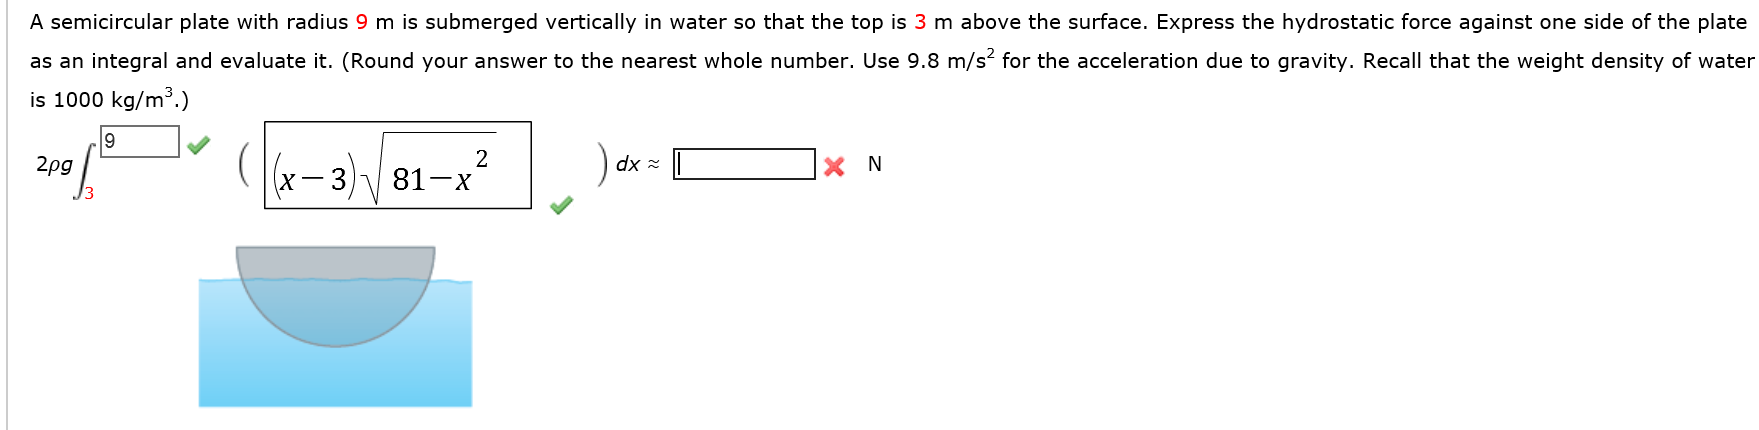 fluid force on vertical side of tank the weight density of water is 62.4 trapezoid